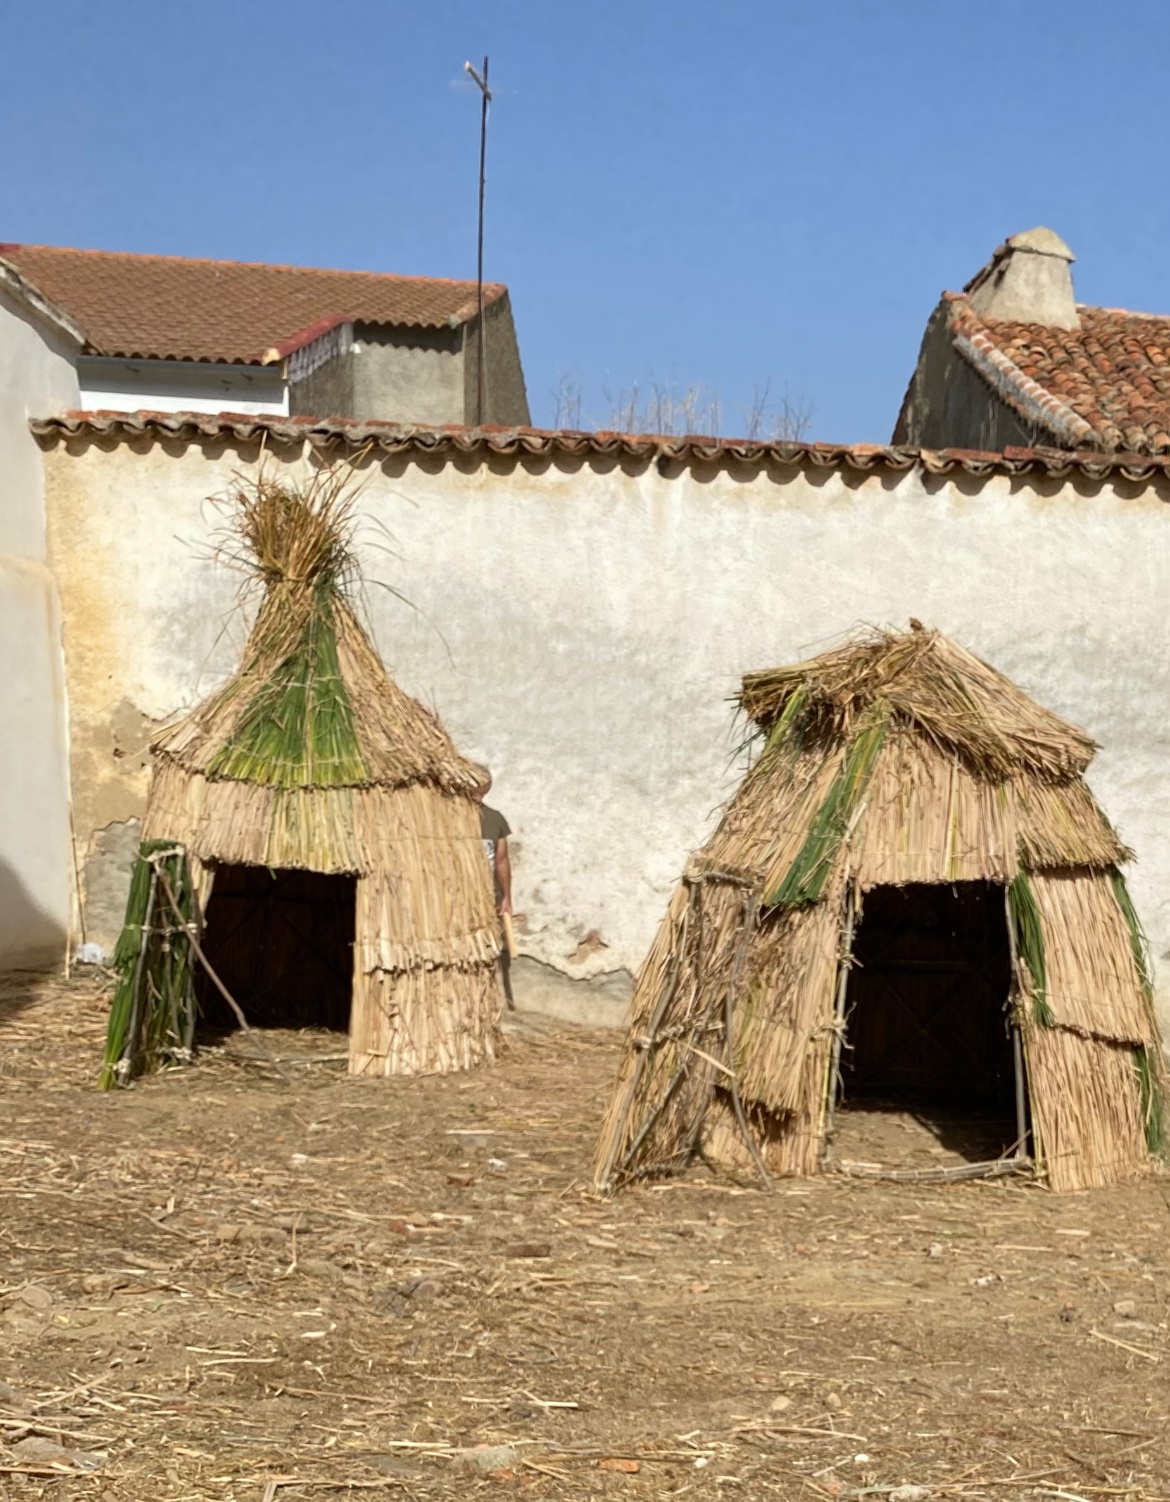 Two chozos built at the edge of a village wall. They are made of plant materials and wood.